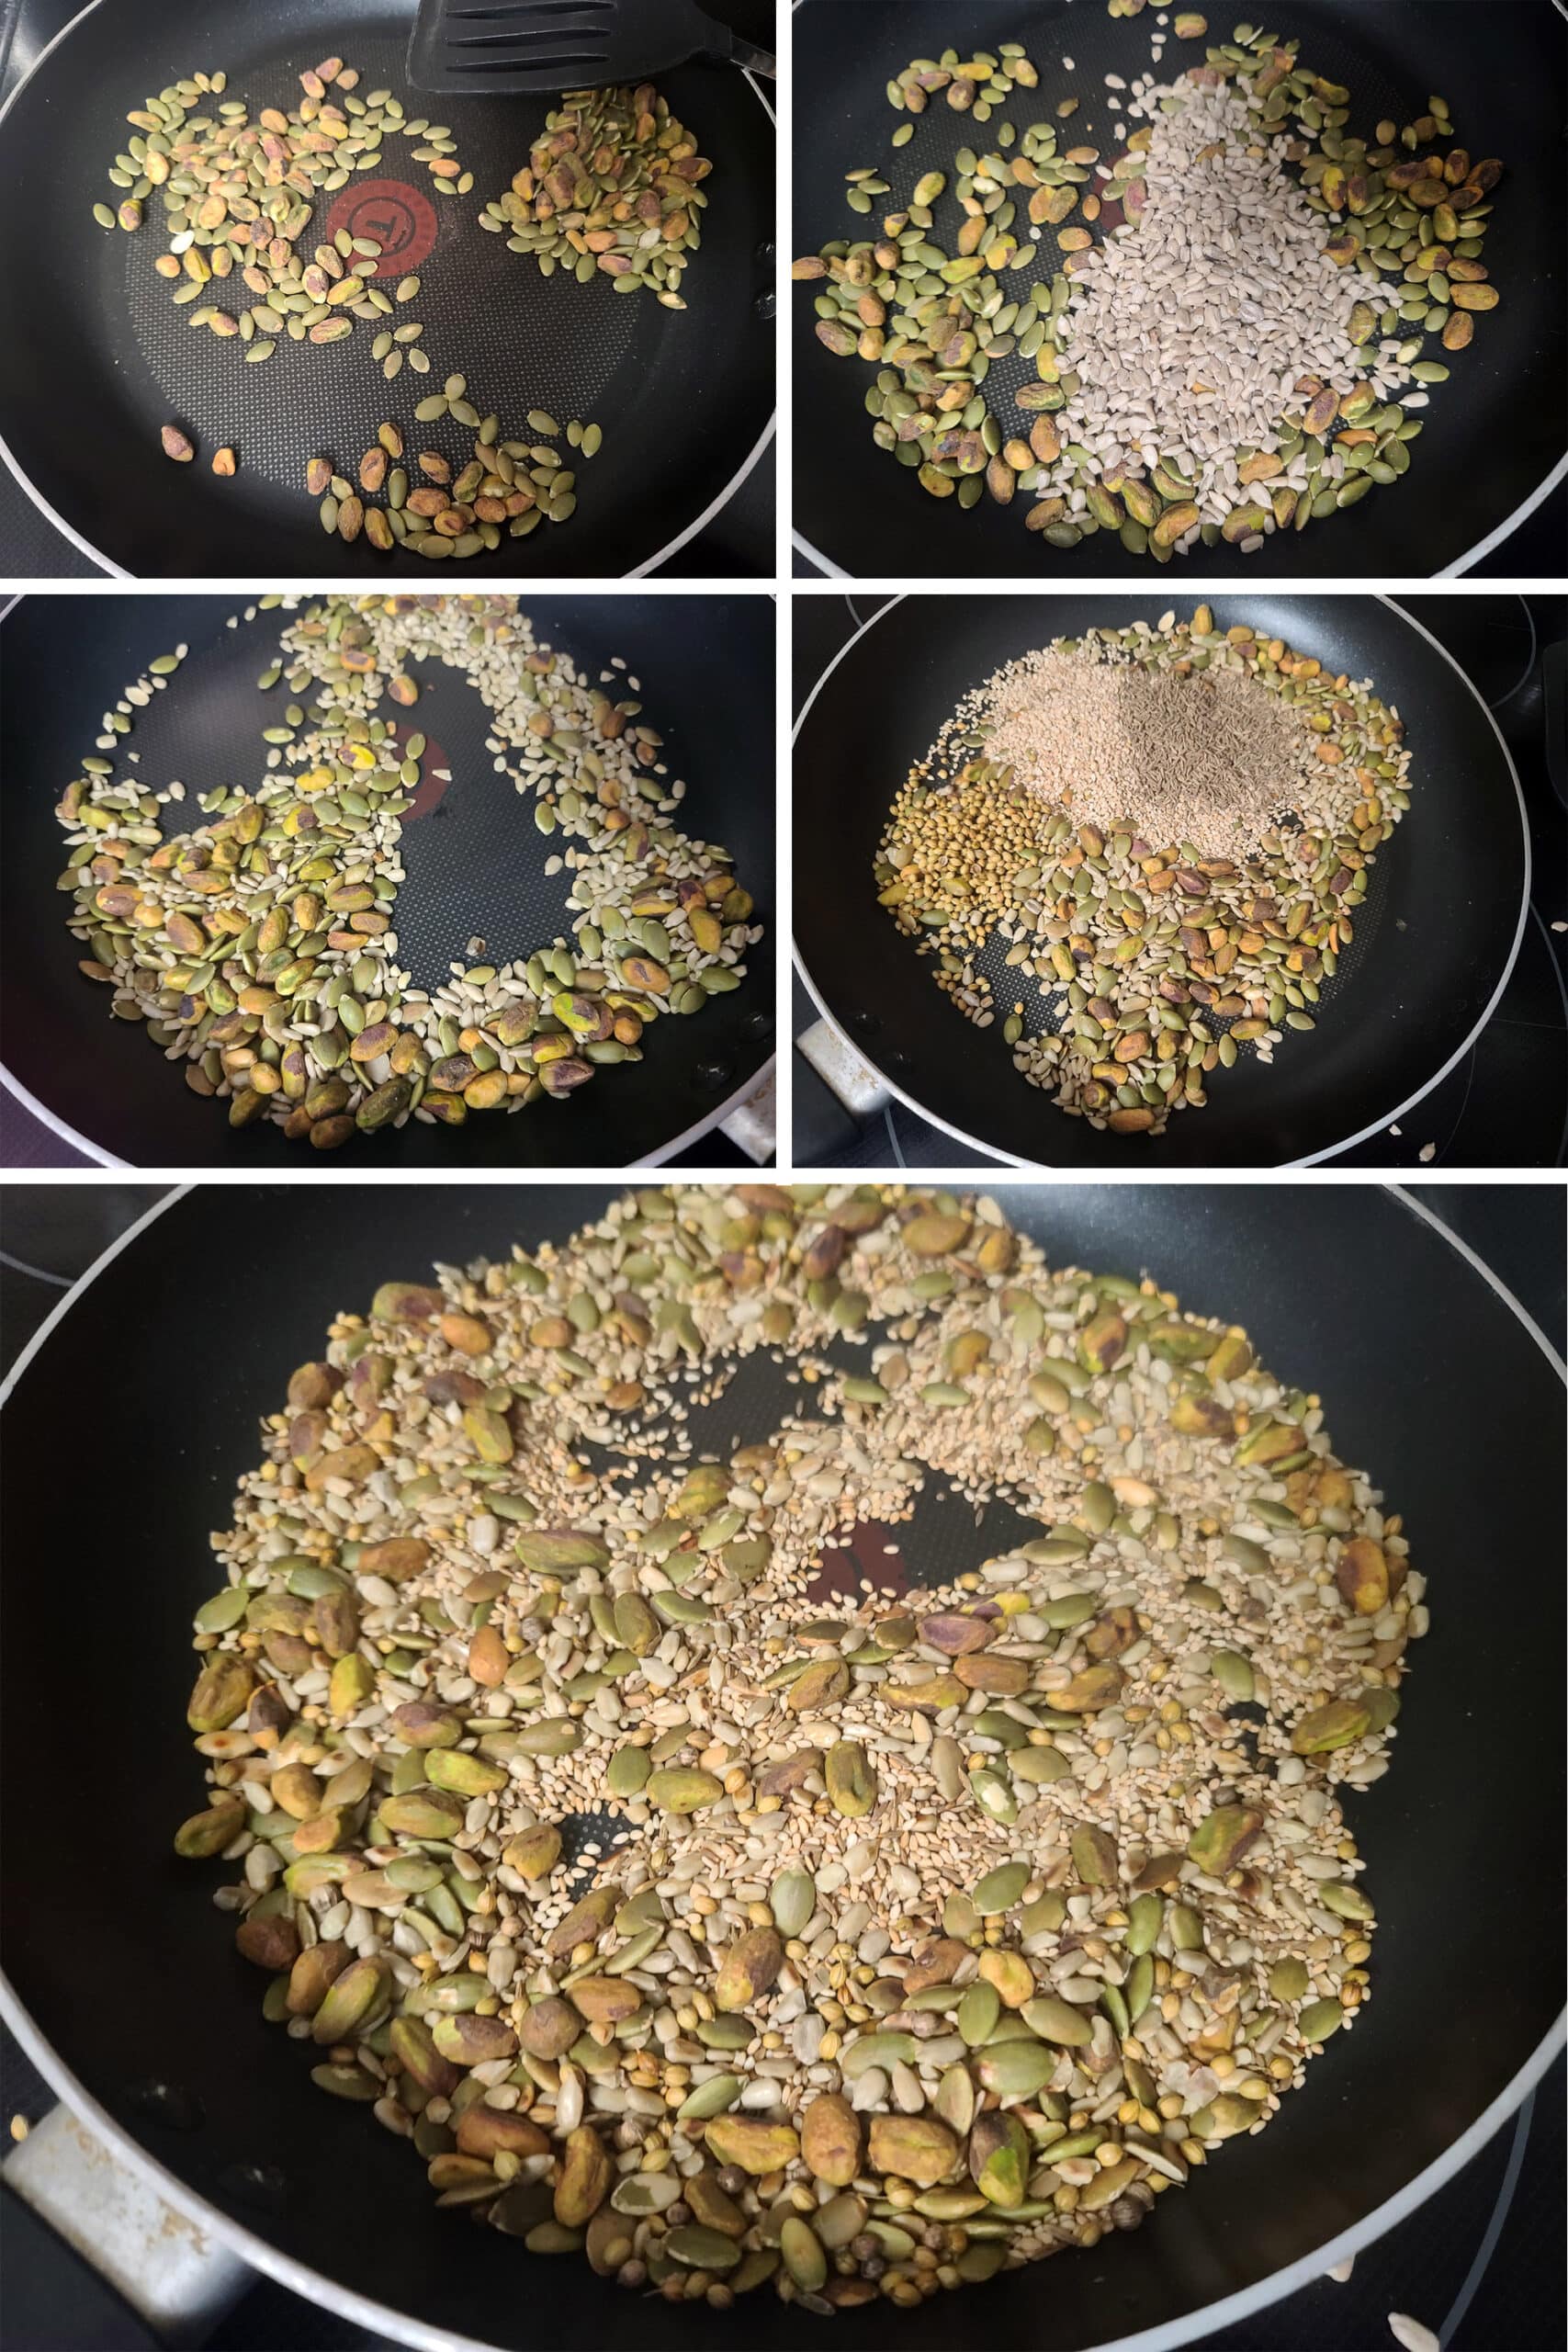 A 5 part image showing the various seeds being toasted in a pan, in steps.